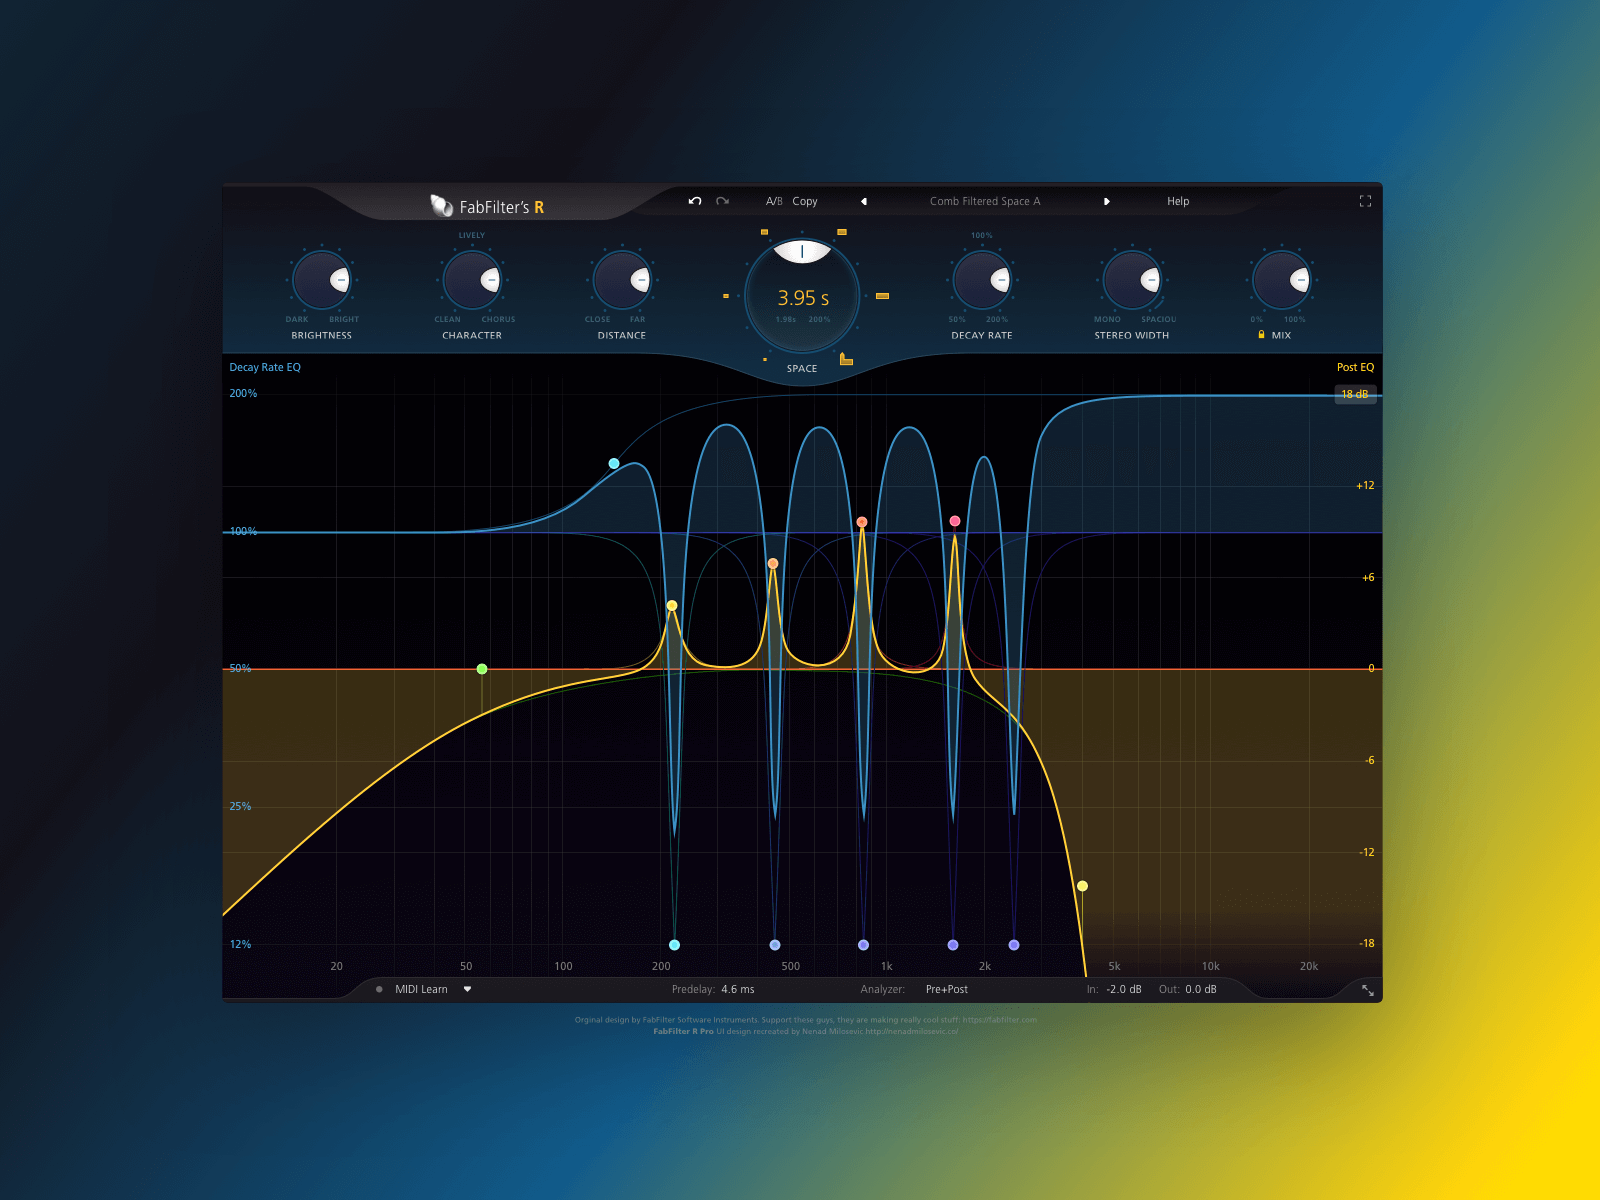 FabFilter's Pro R